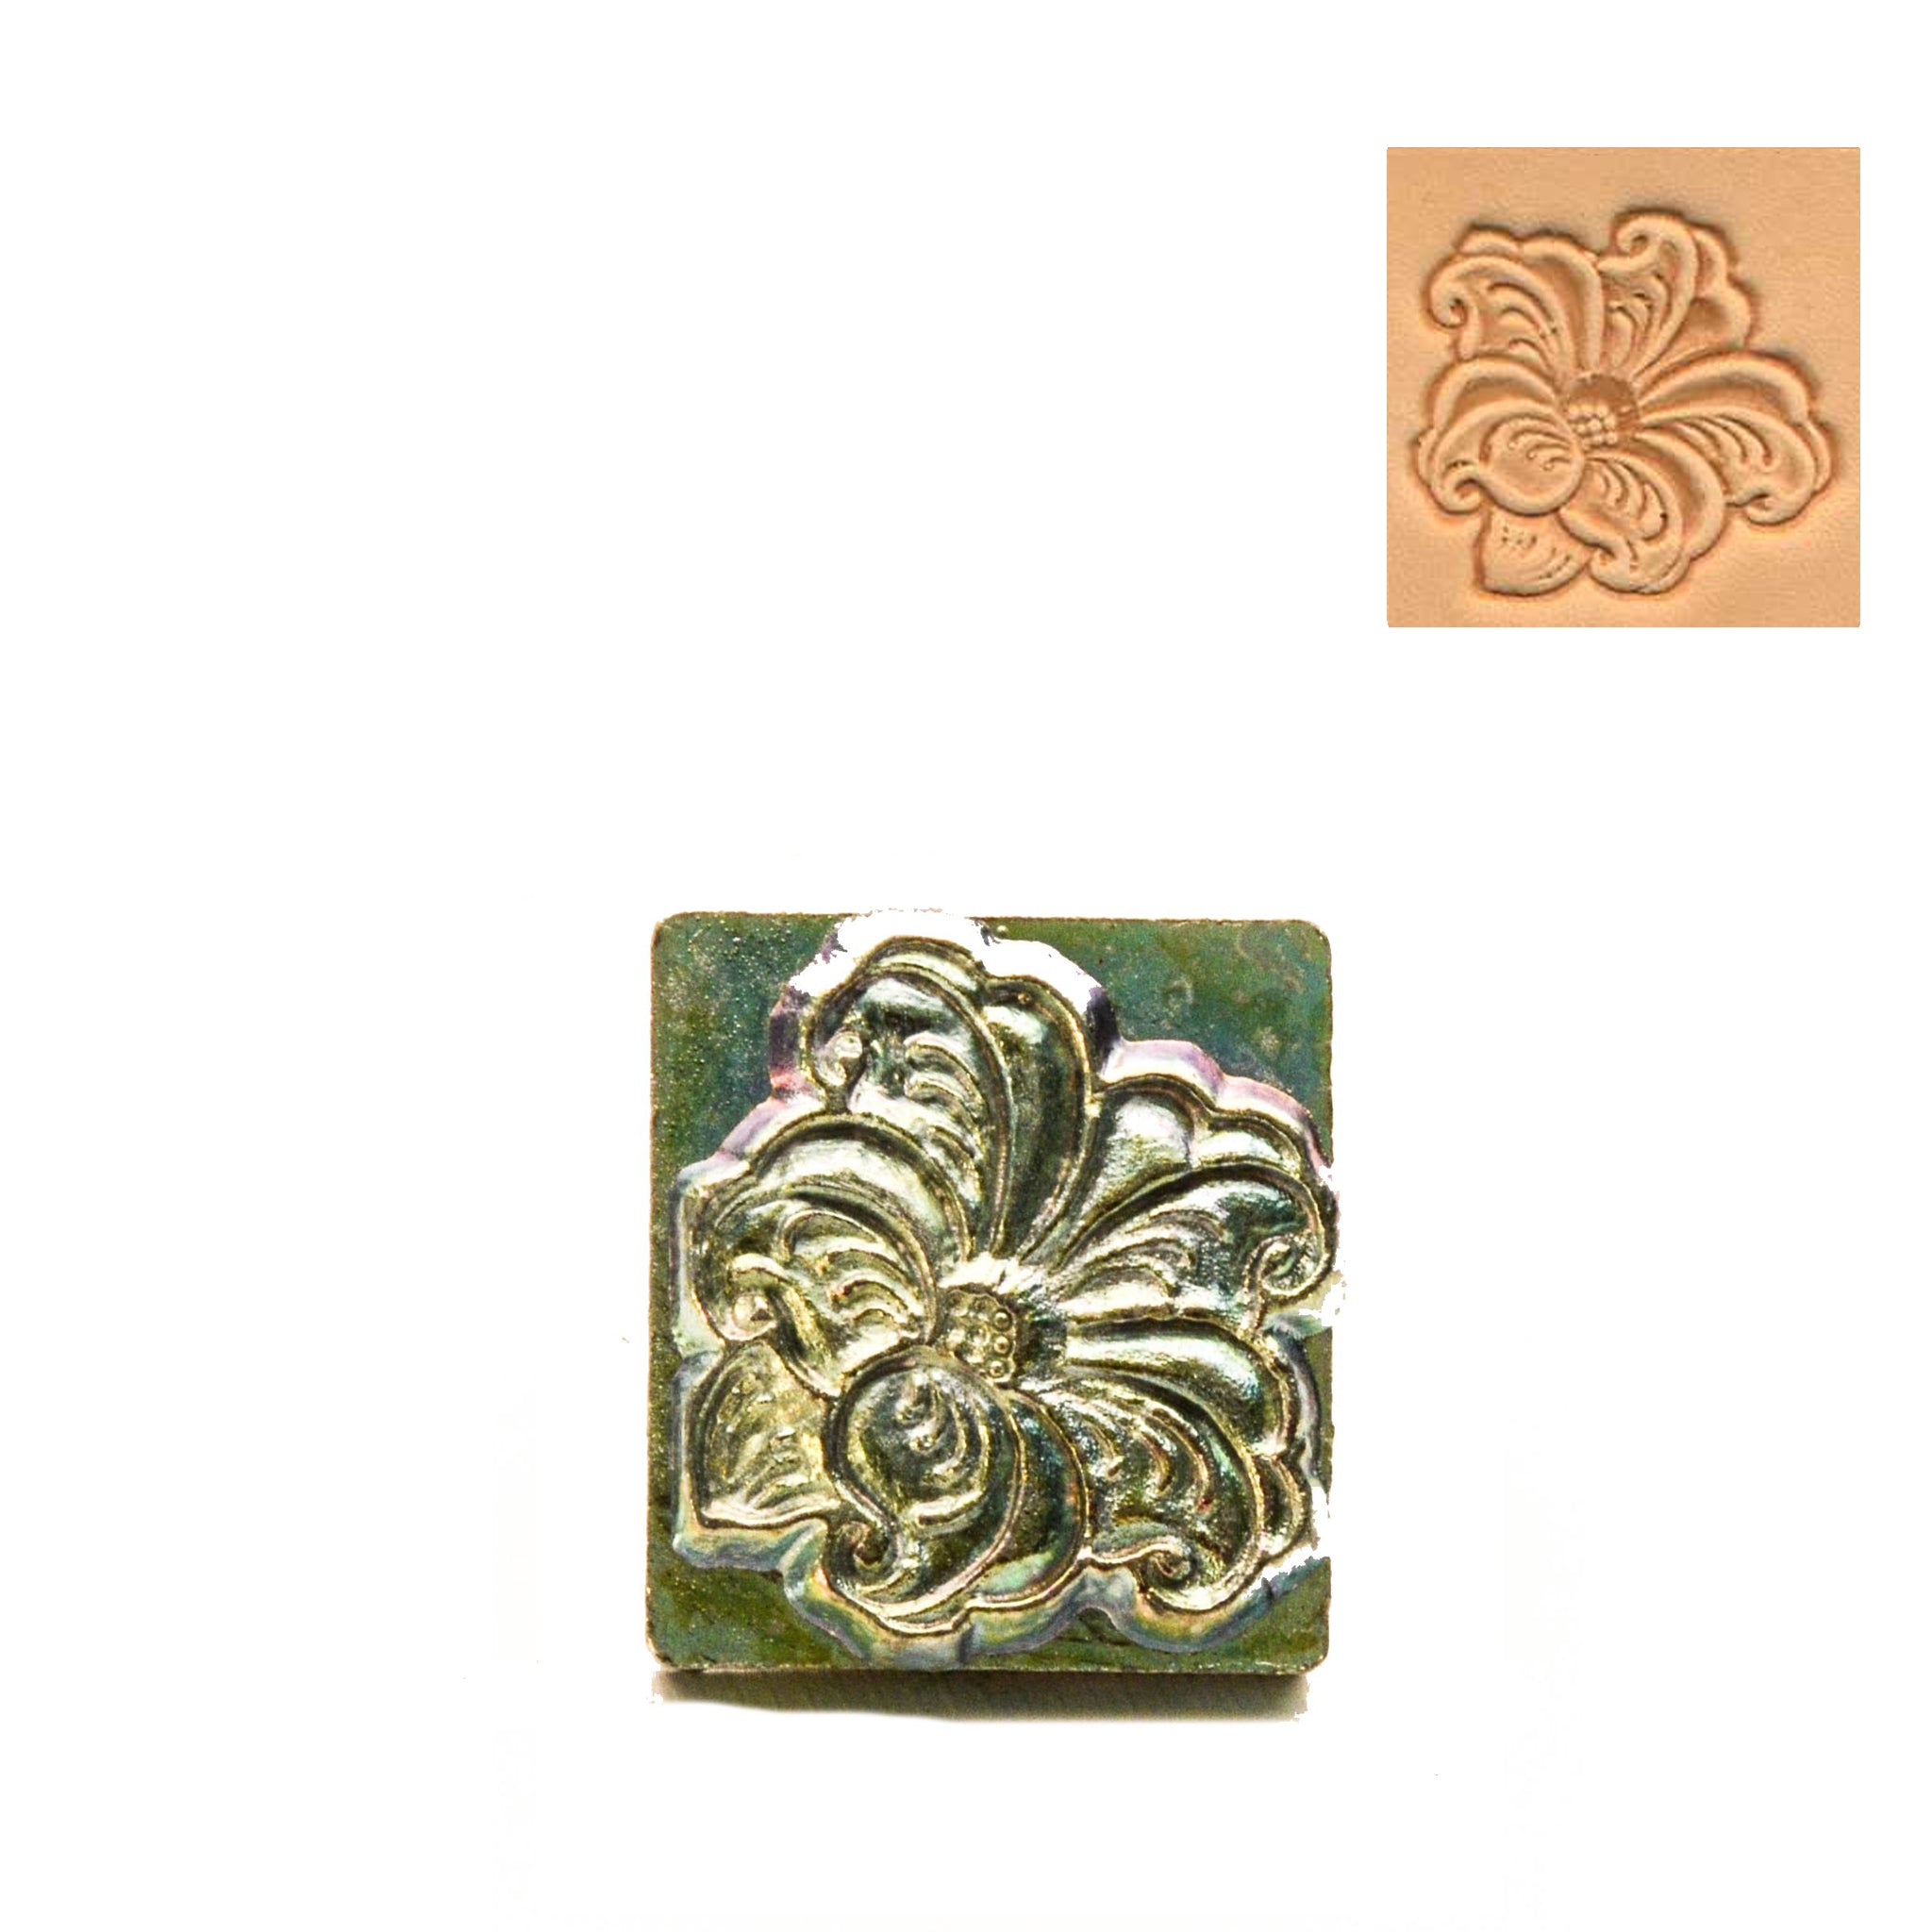 Lily 3D Embossing Stamp from Identity Leathercraft